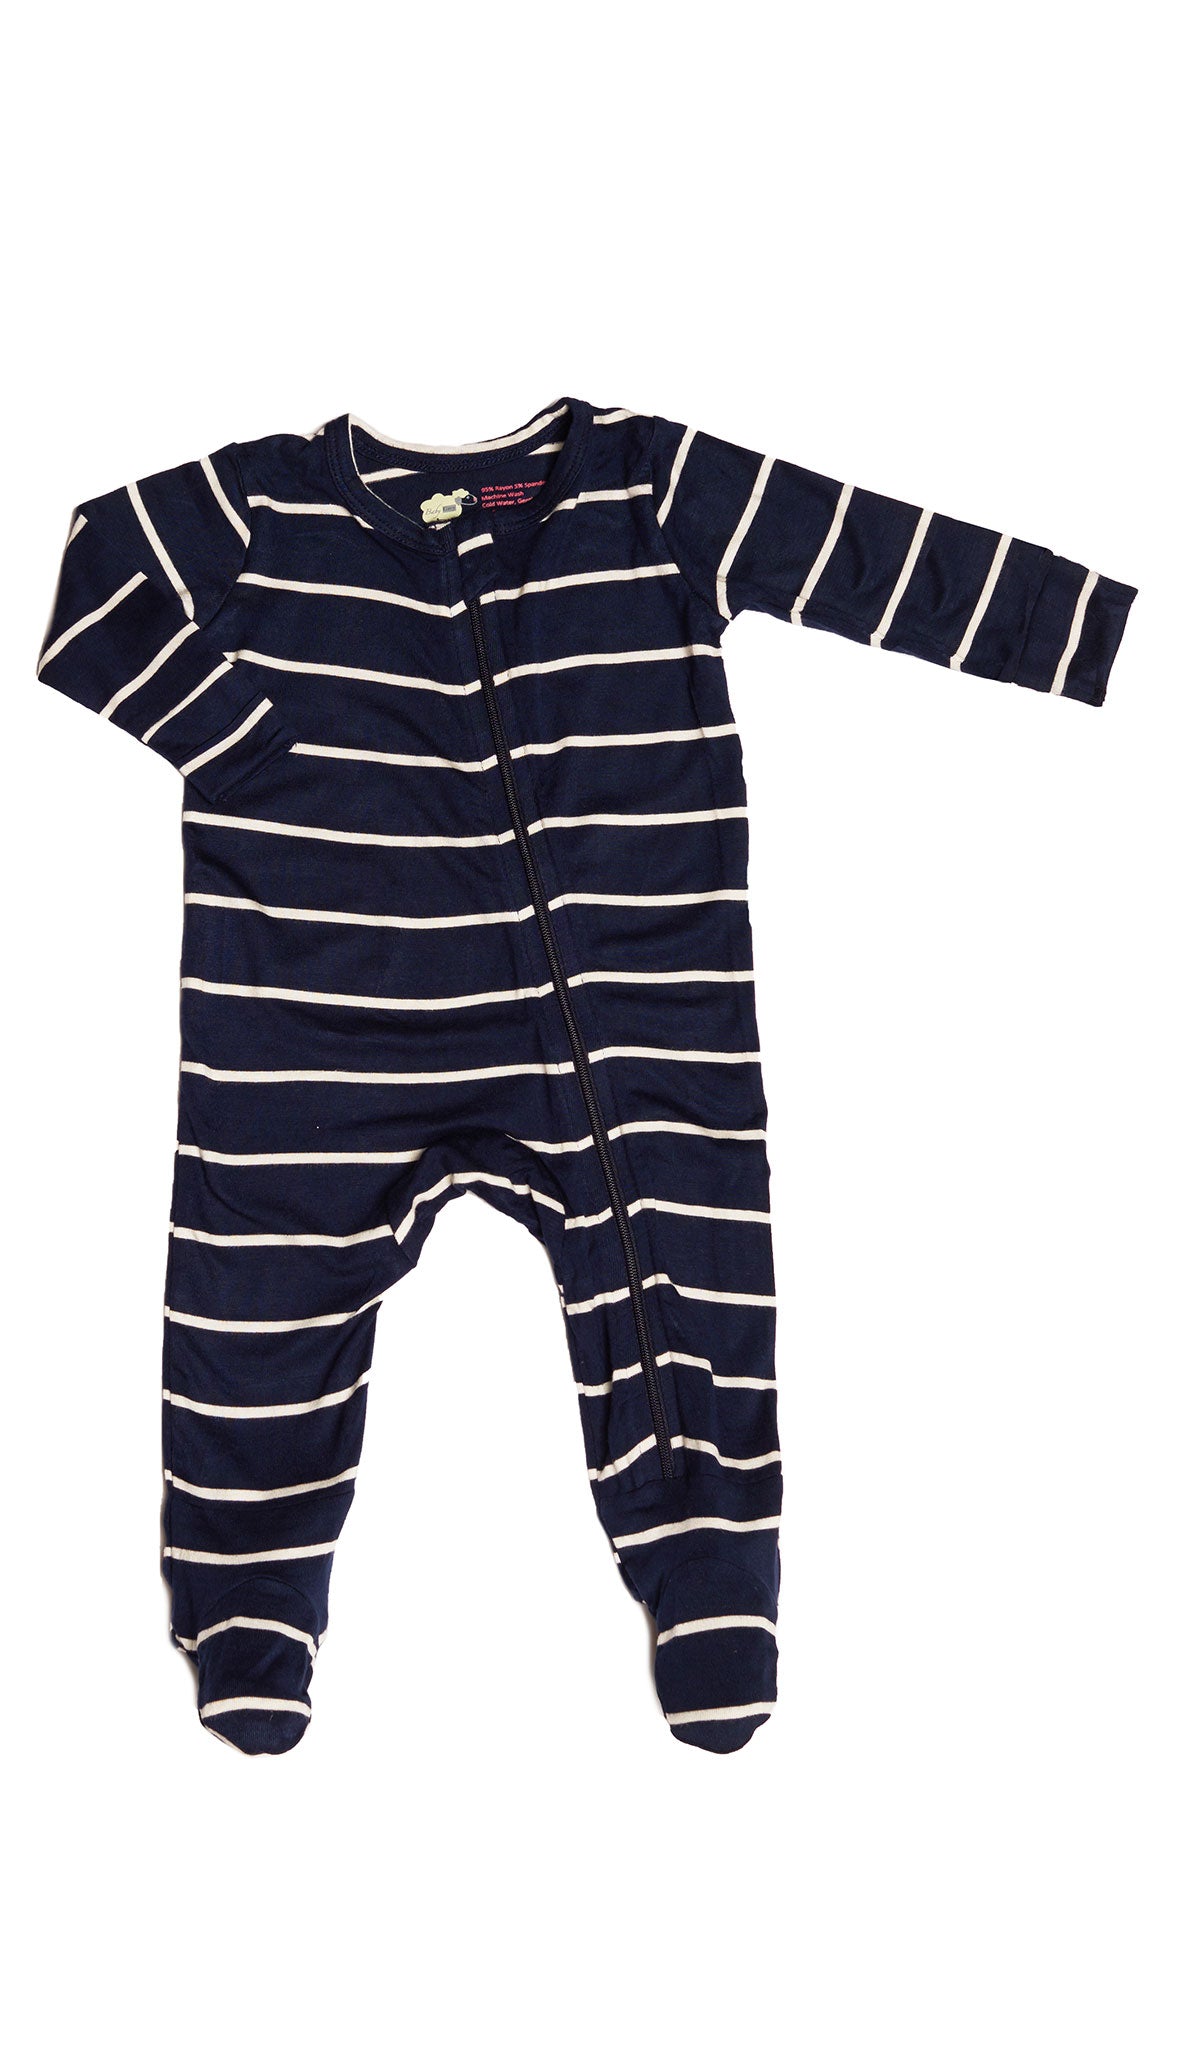 Navy Footie with long sleeves and zip front.